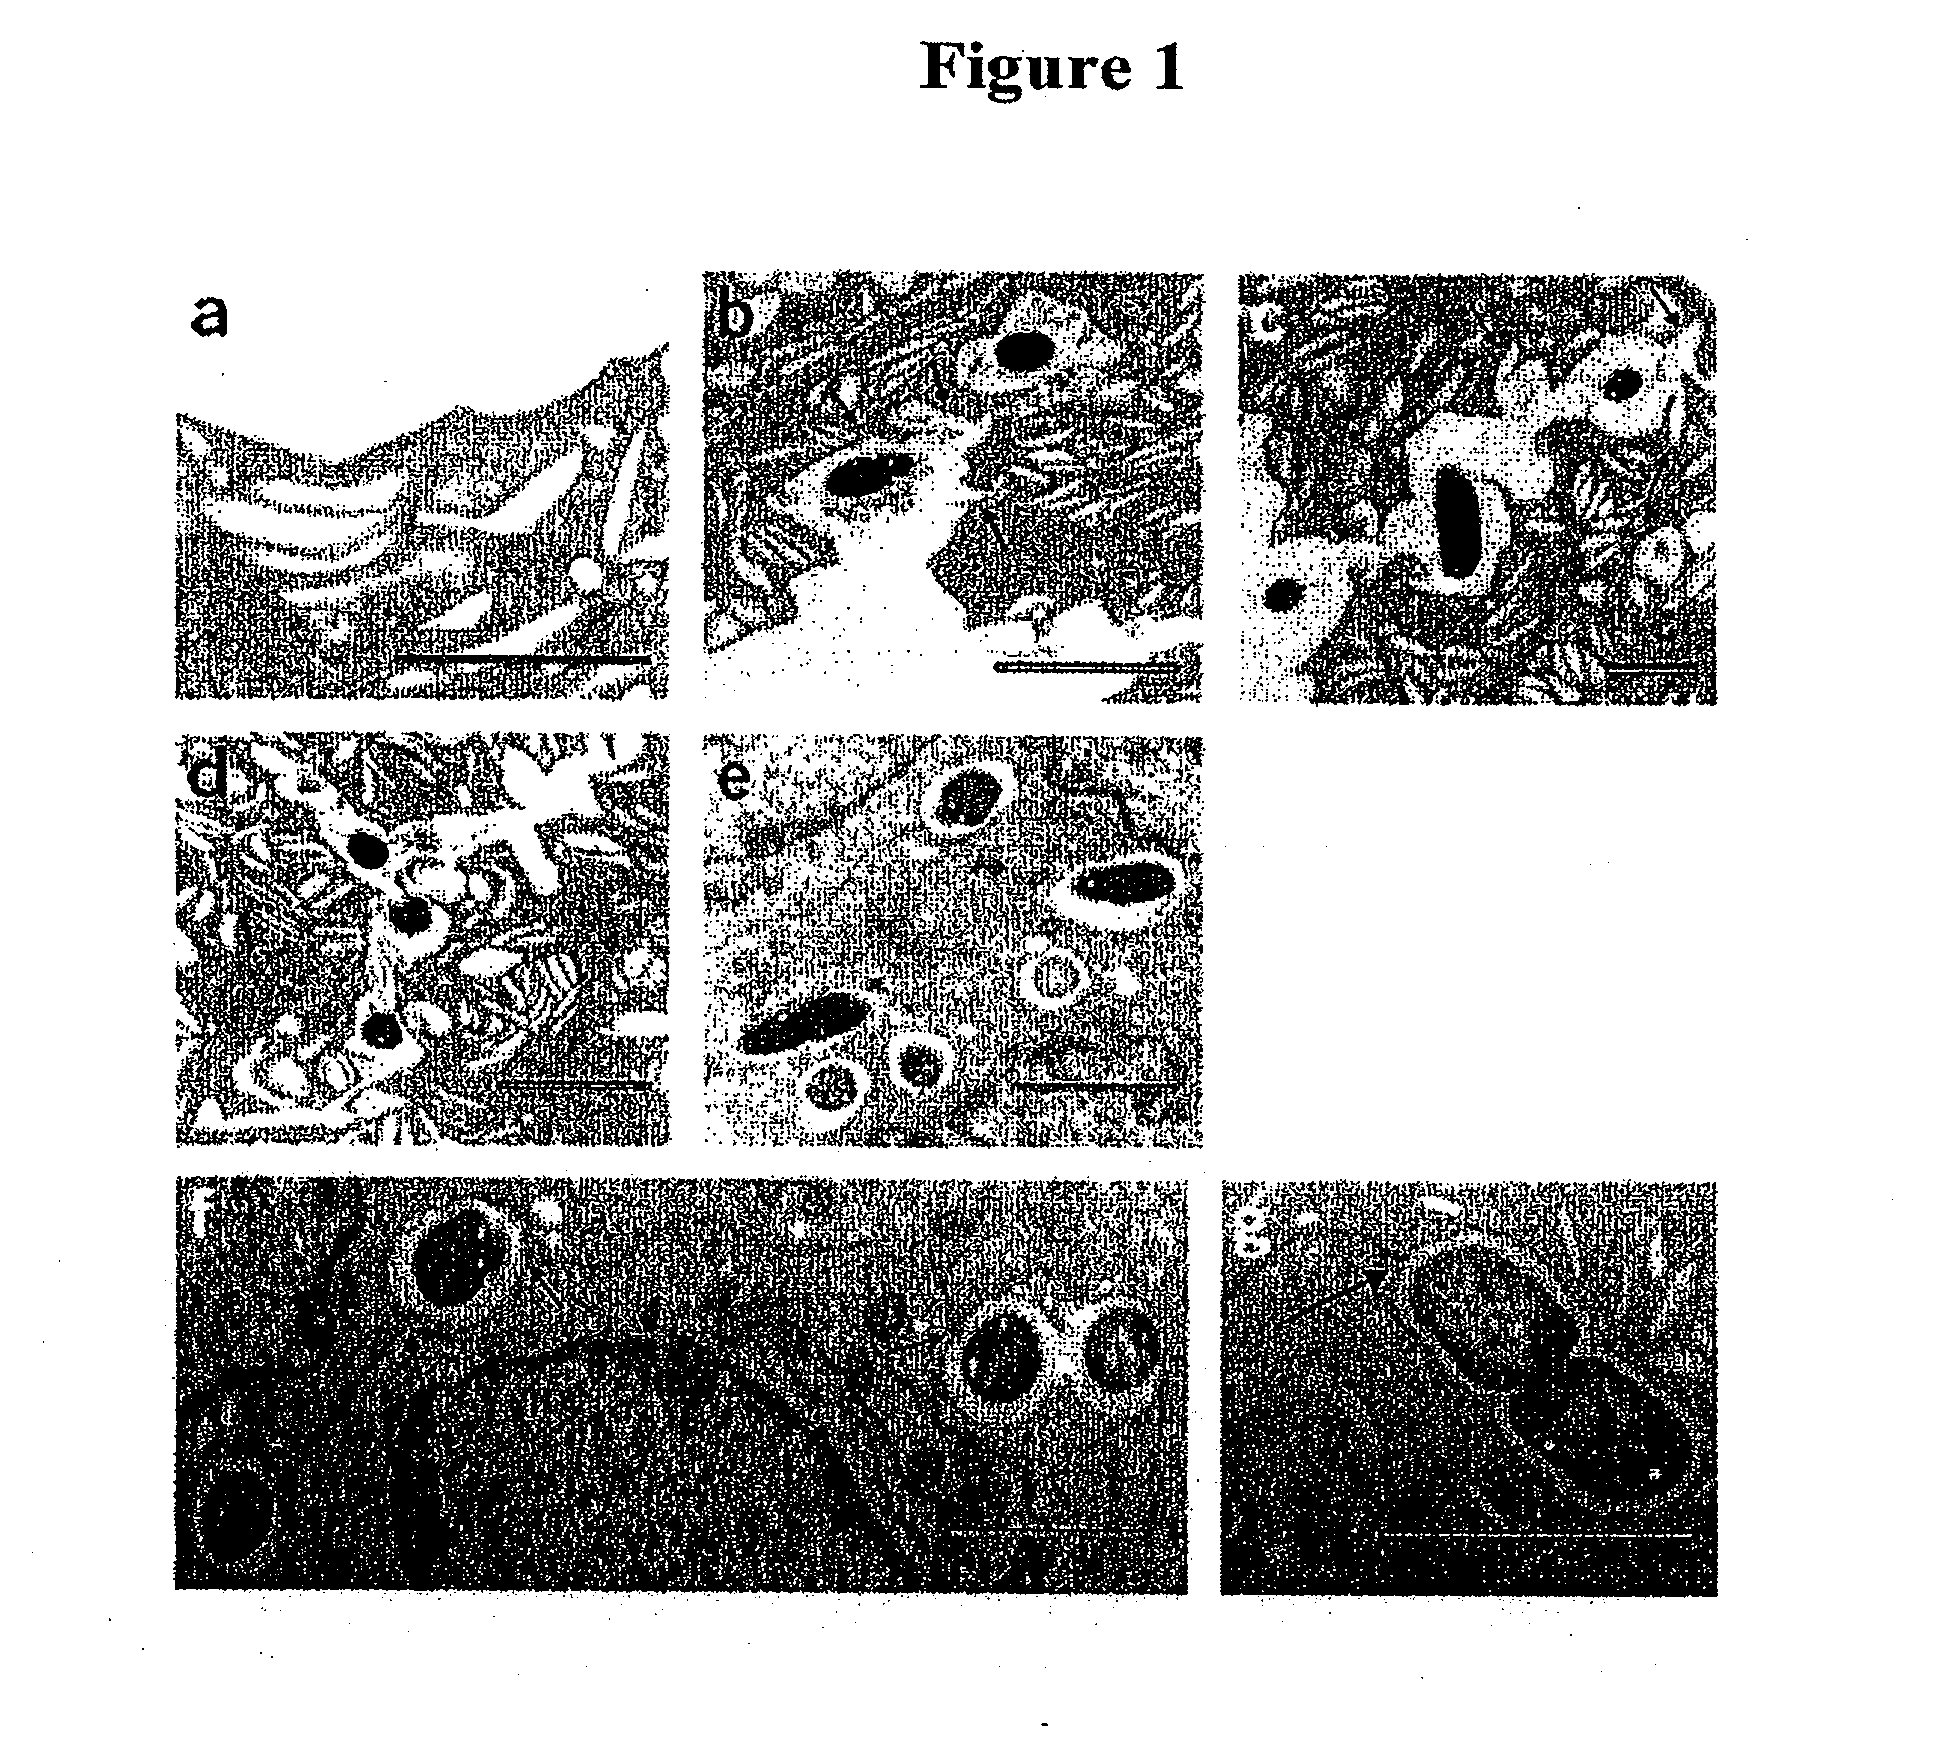 Methods and compositions for treating urinary tract infections using agents that mimic or elevate cyclic amp